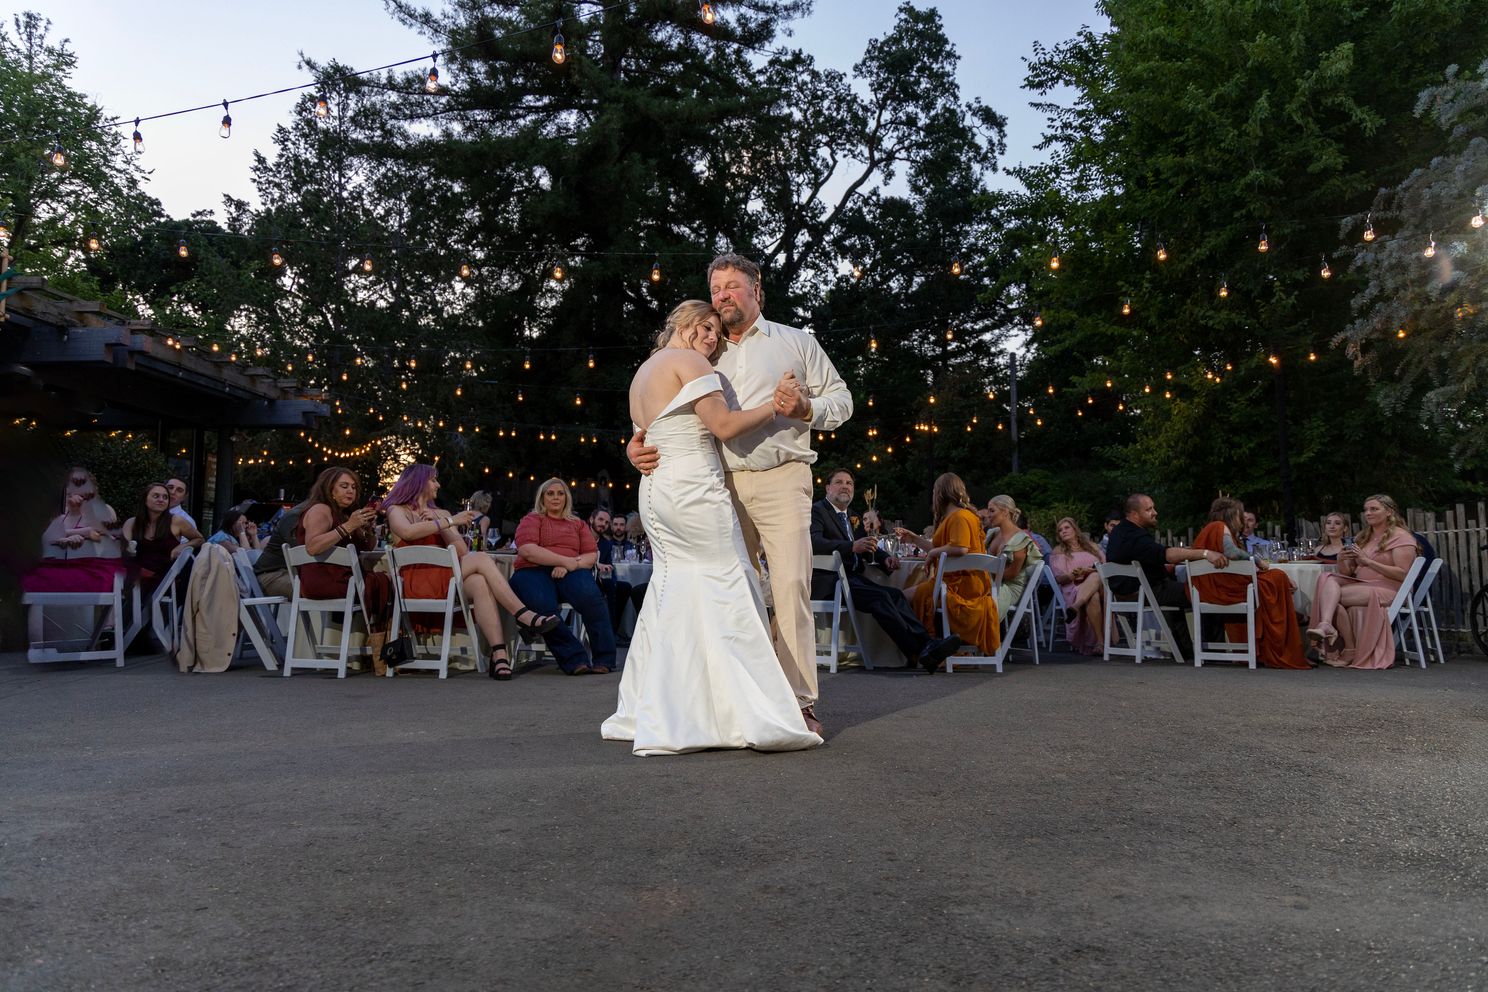 Wedding at Sacramento Zoo. First dance at the reception in the courtyard. Photo and video.